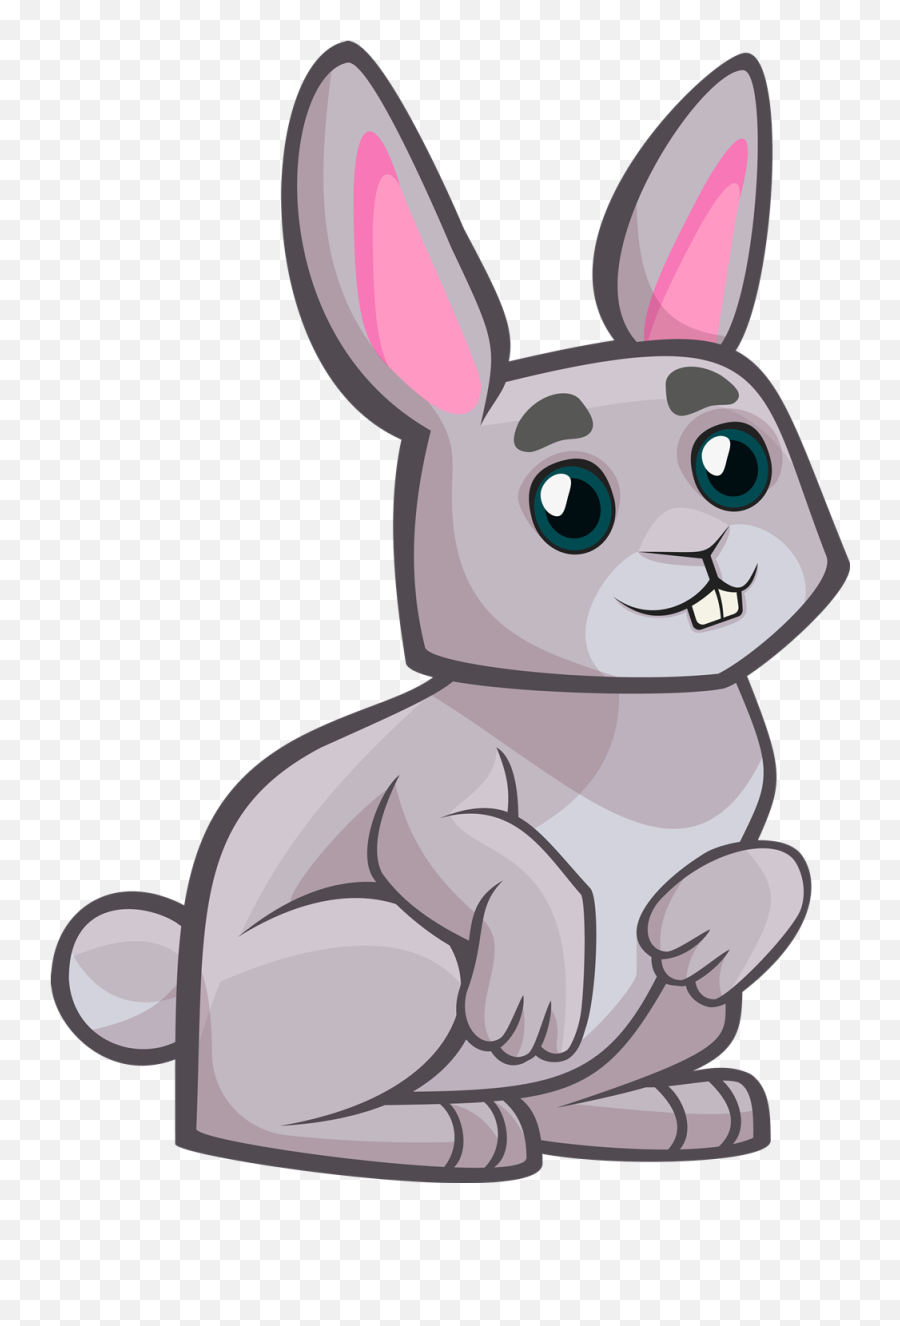 Library Of Freeware Image Black And White For - Clip Art Rabbit Kids Png,Free Pngs For Commercial Use